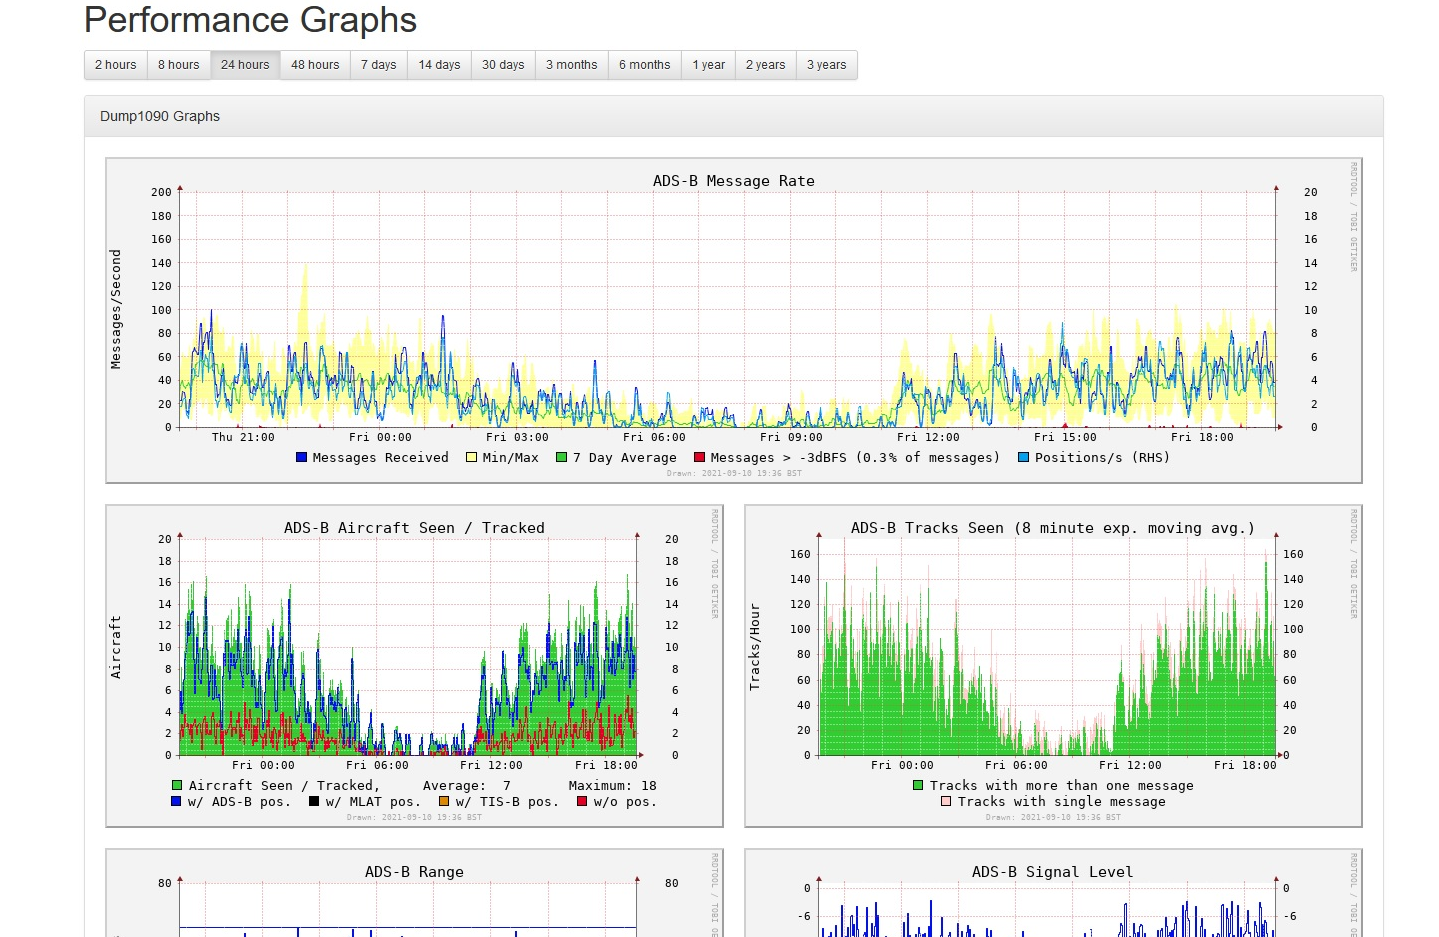 A screenshot of a web portal where several ADS-B performance graphs are displayed